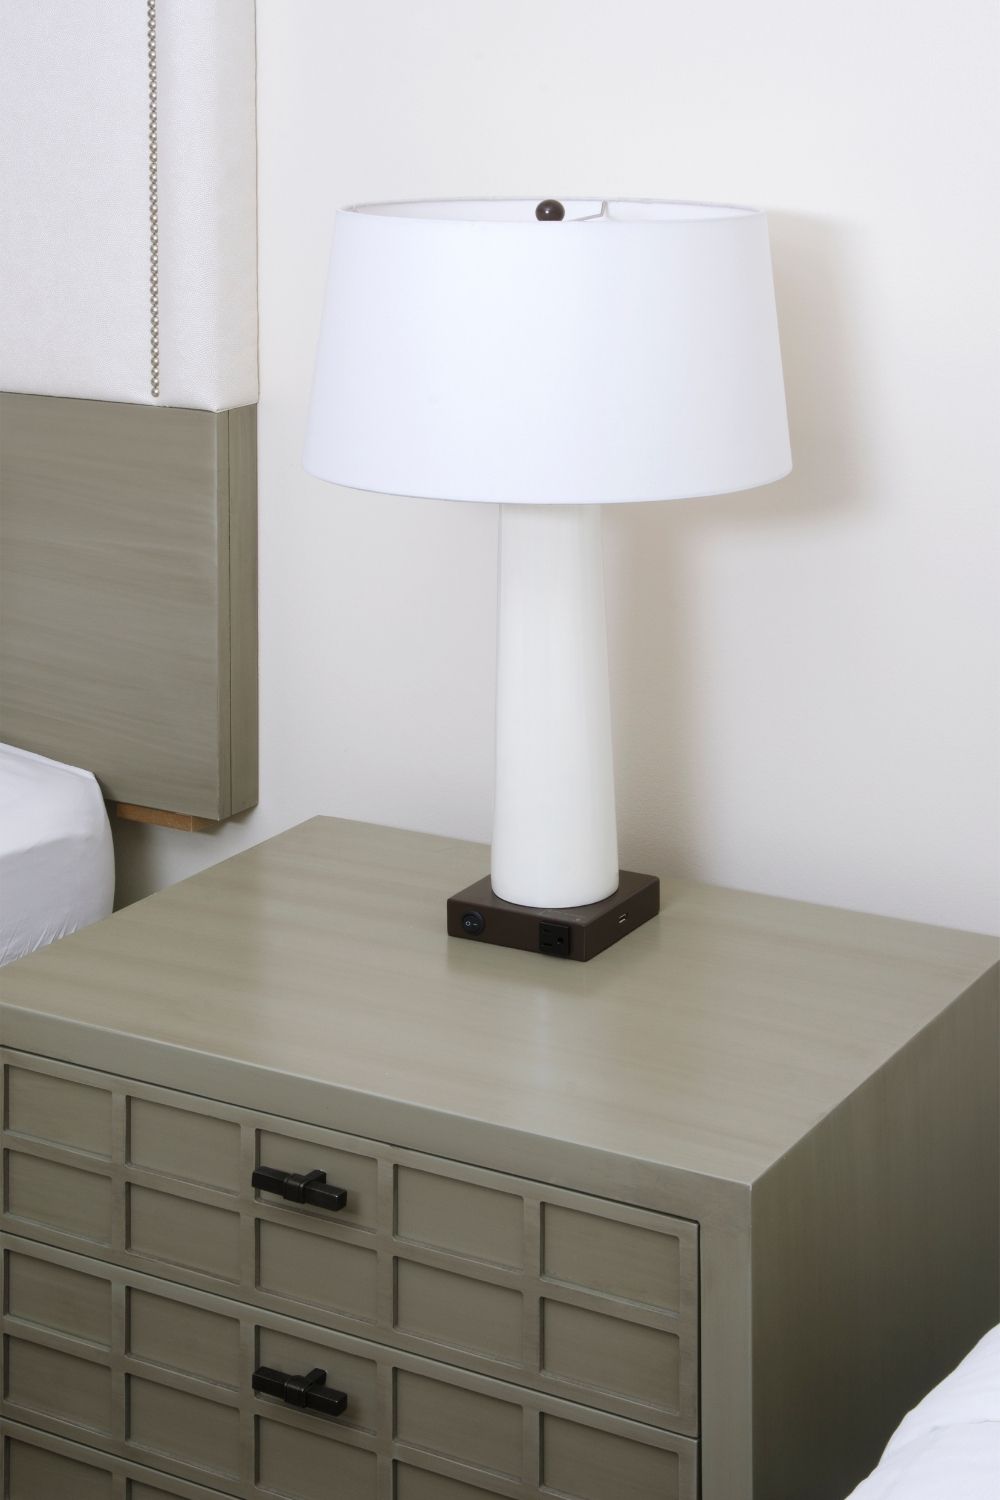 The nightstand is important in a Mediterranean home